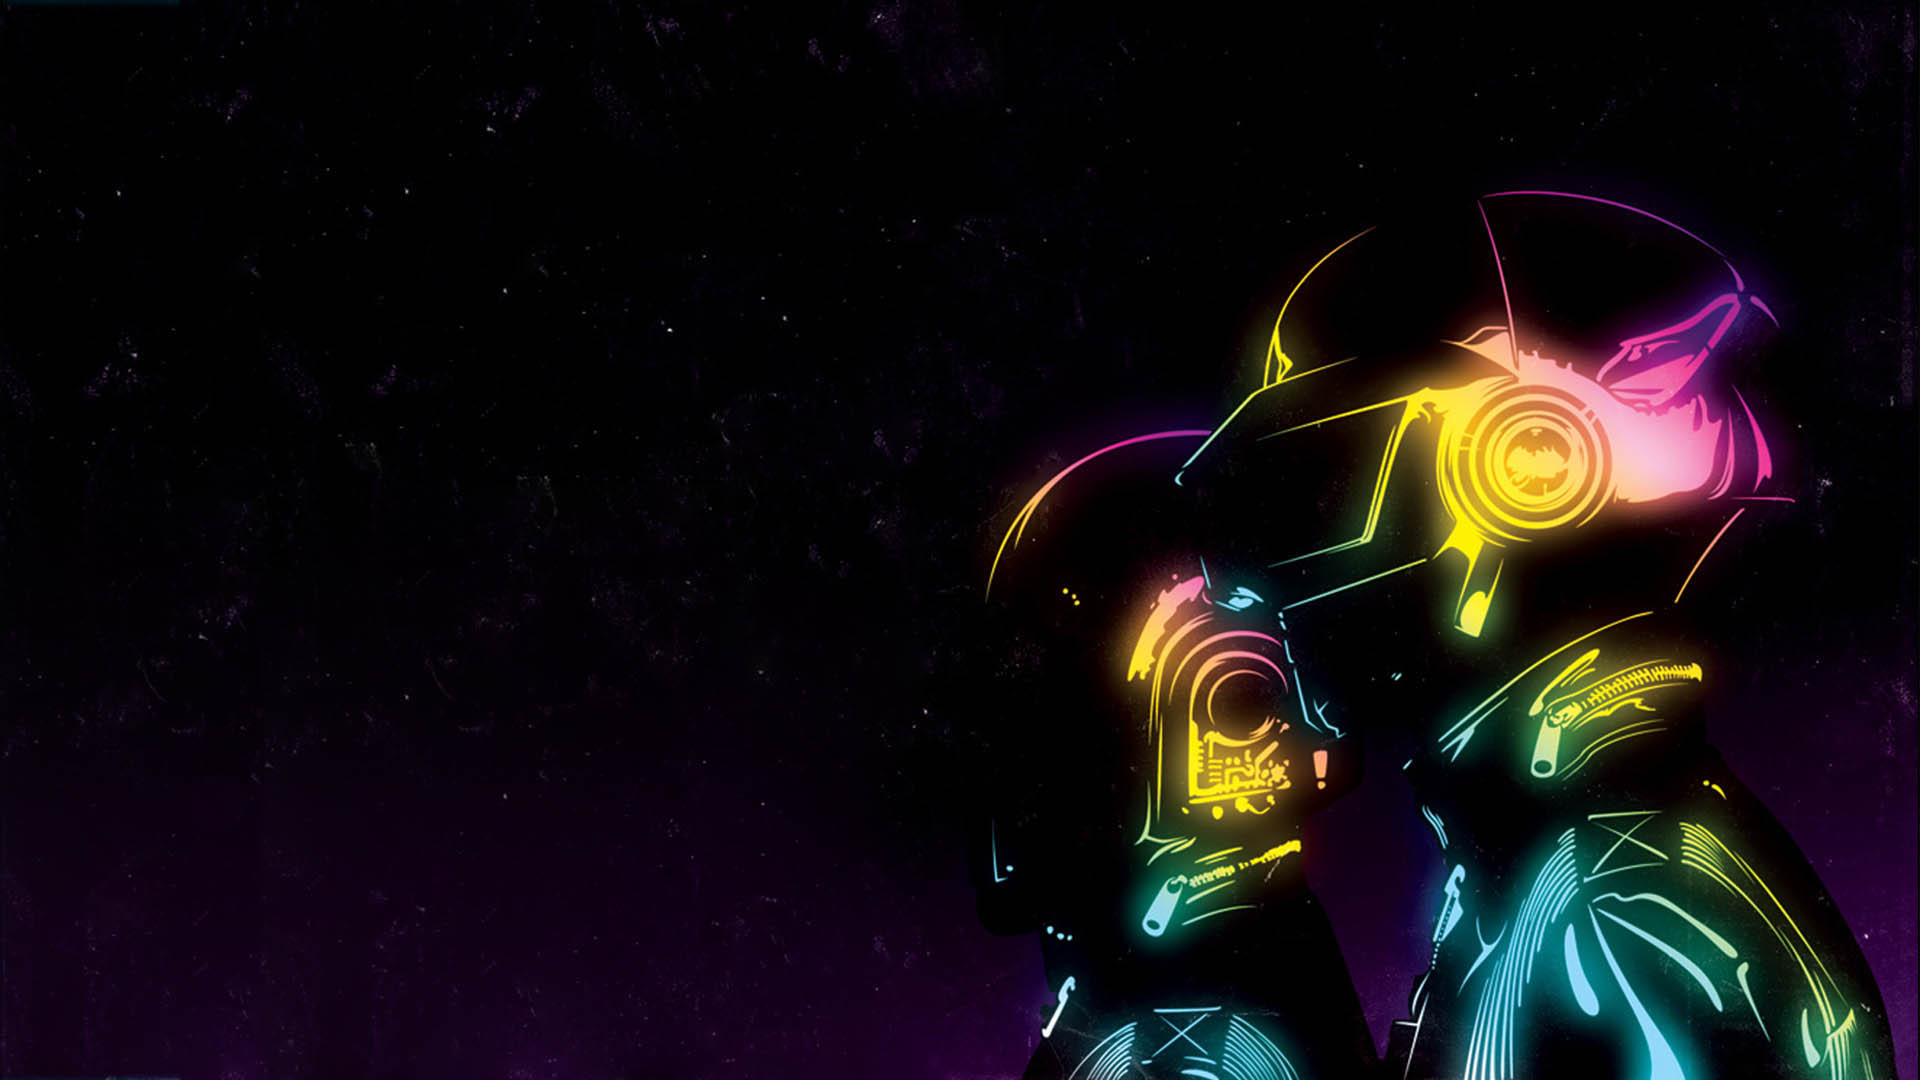 1920x1080 220+ Daft Punk HD Wallpapers and Backgrounds